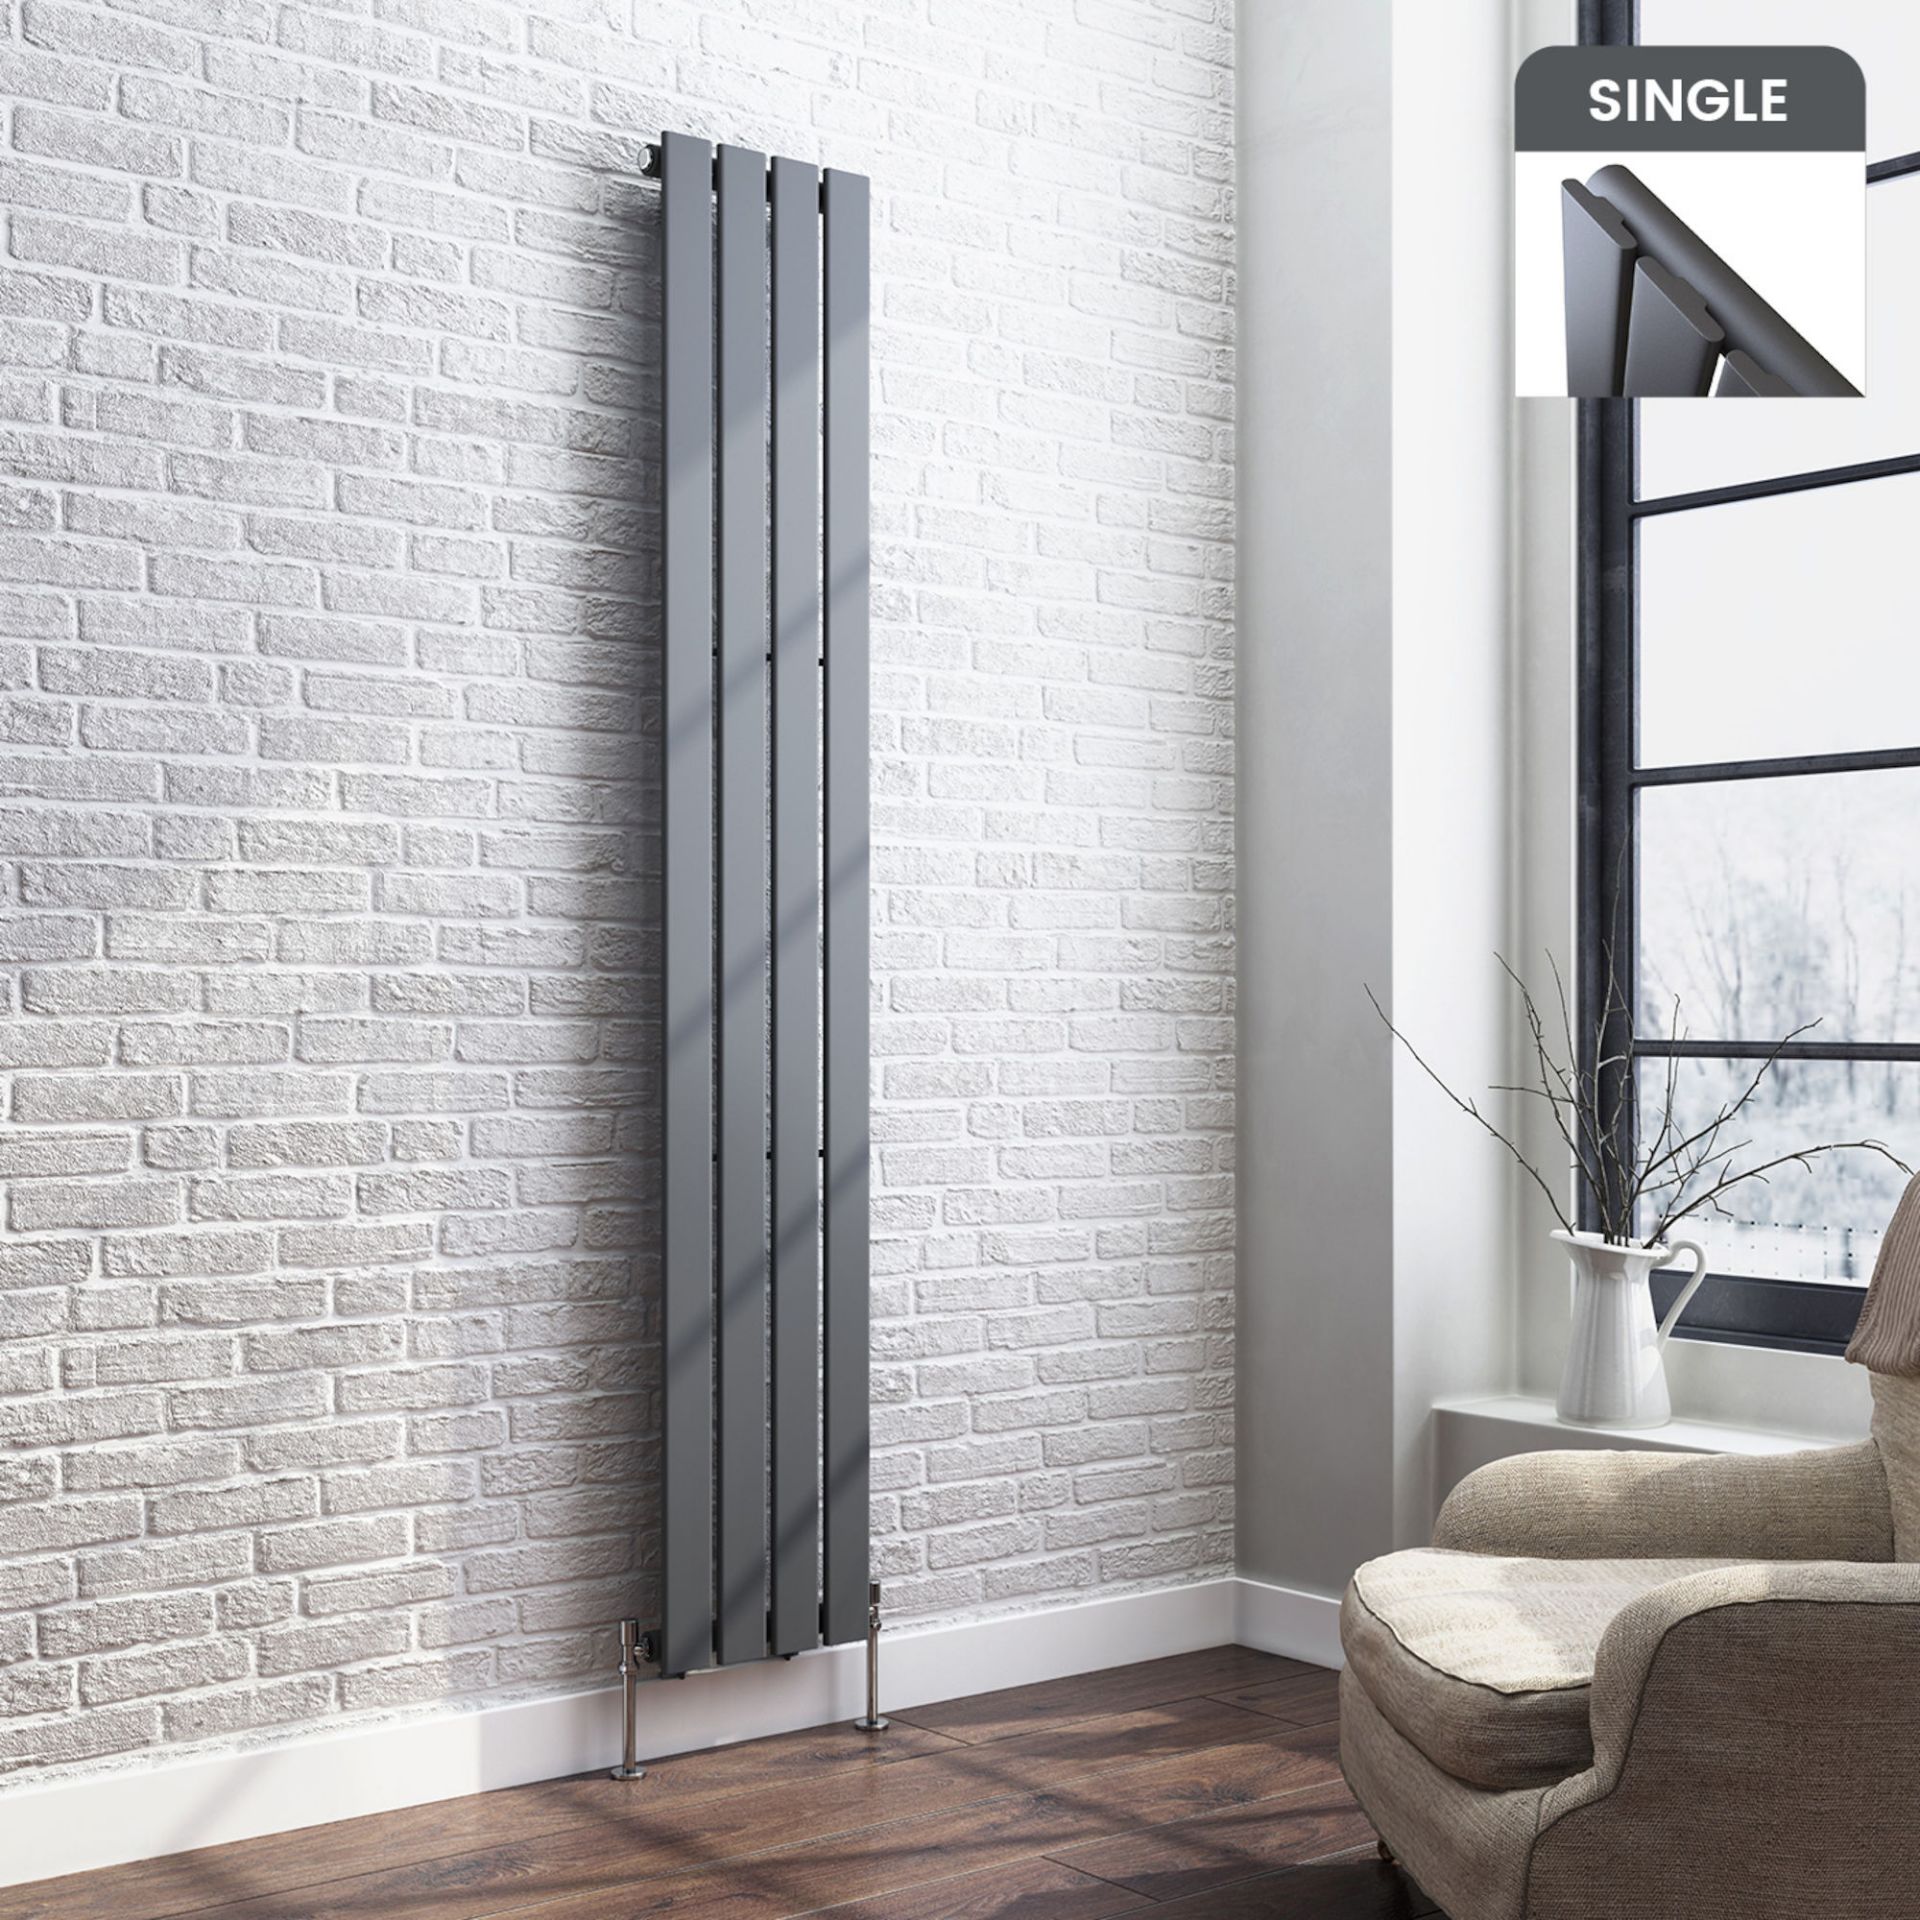 (XM100) 1800x300mm Anthracite Single Flat Panel Vertical Radiator. RRP £249.99. Made with low carbon